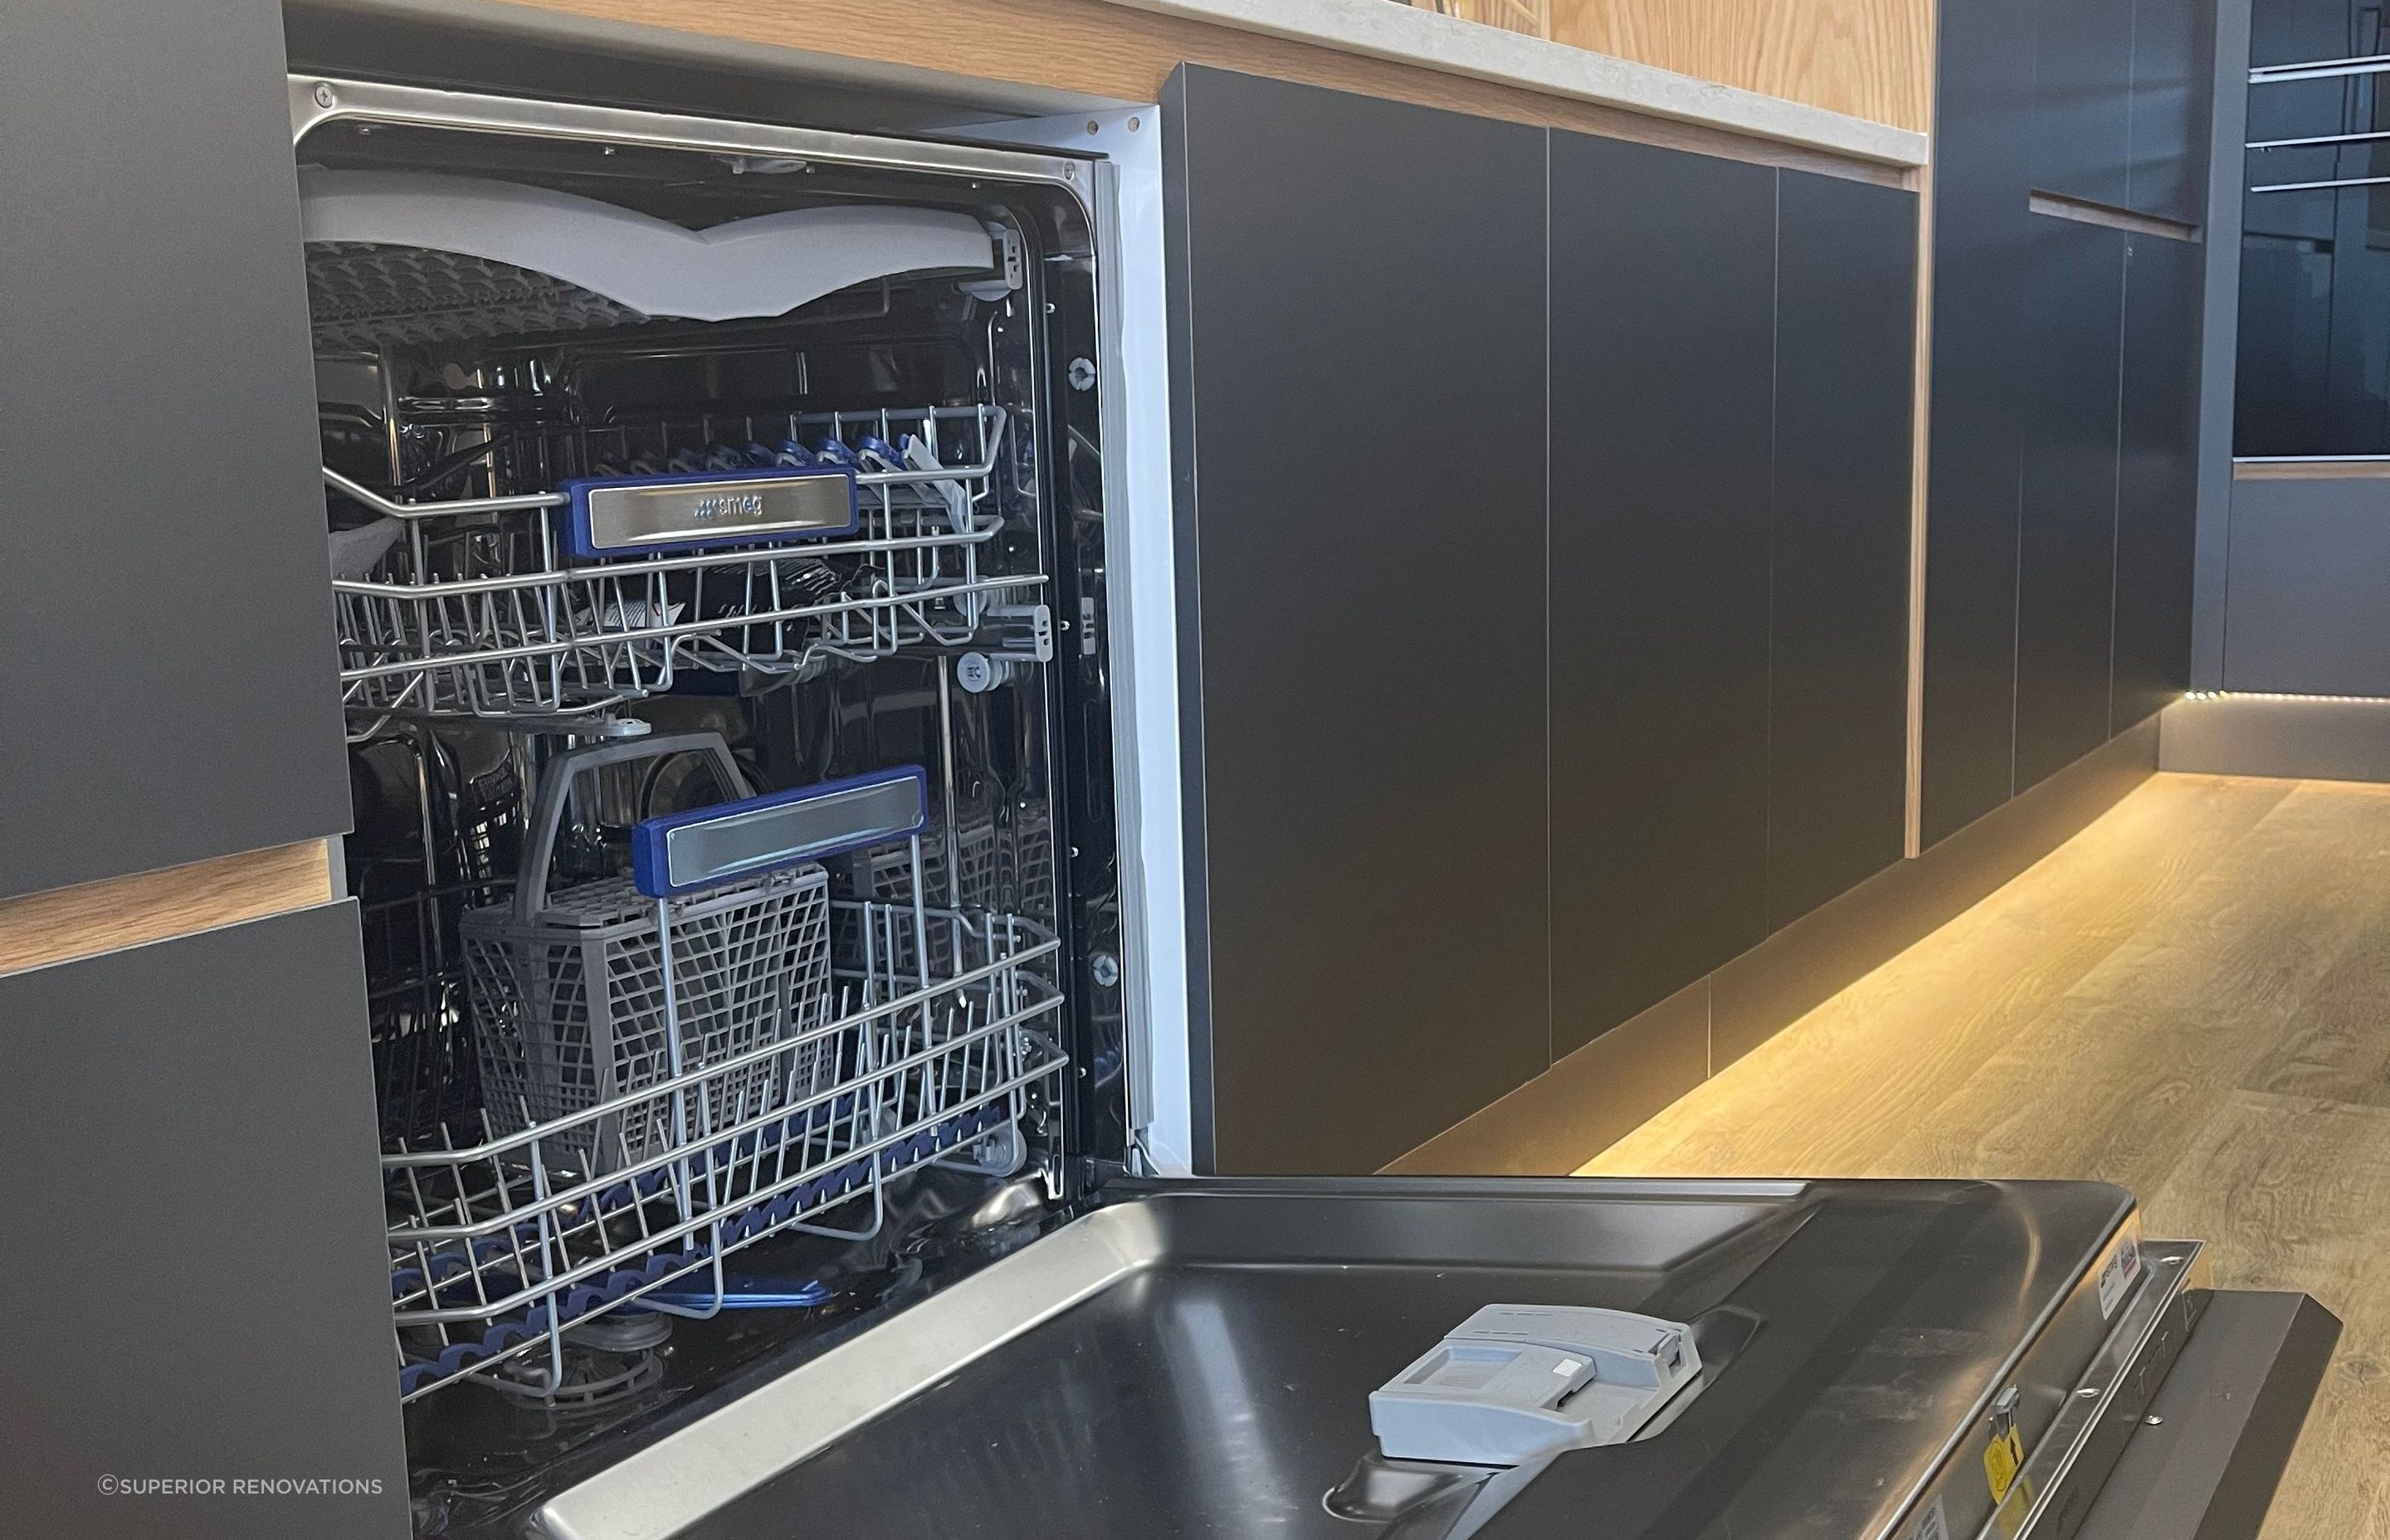 Hidden SMEG dishwasher with cabinet front attached to the exterior of the dishwasher in our kitchen showroom in Auckland